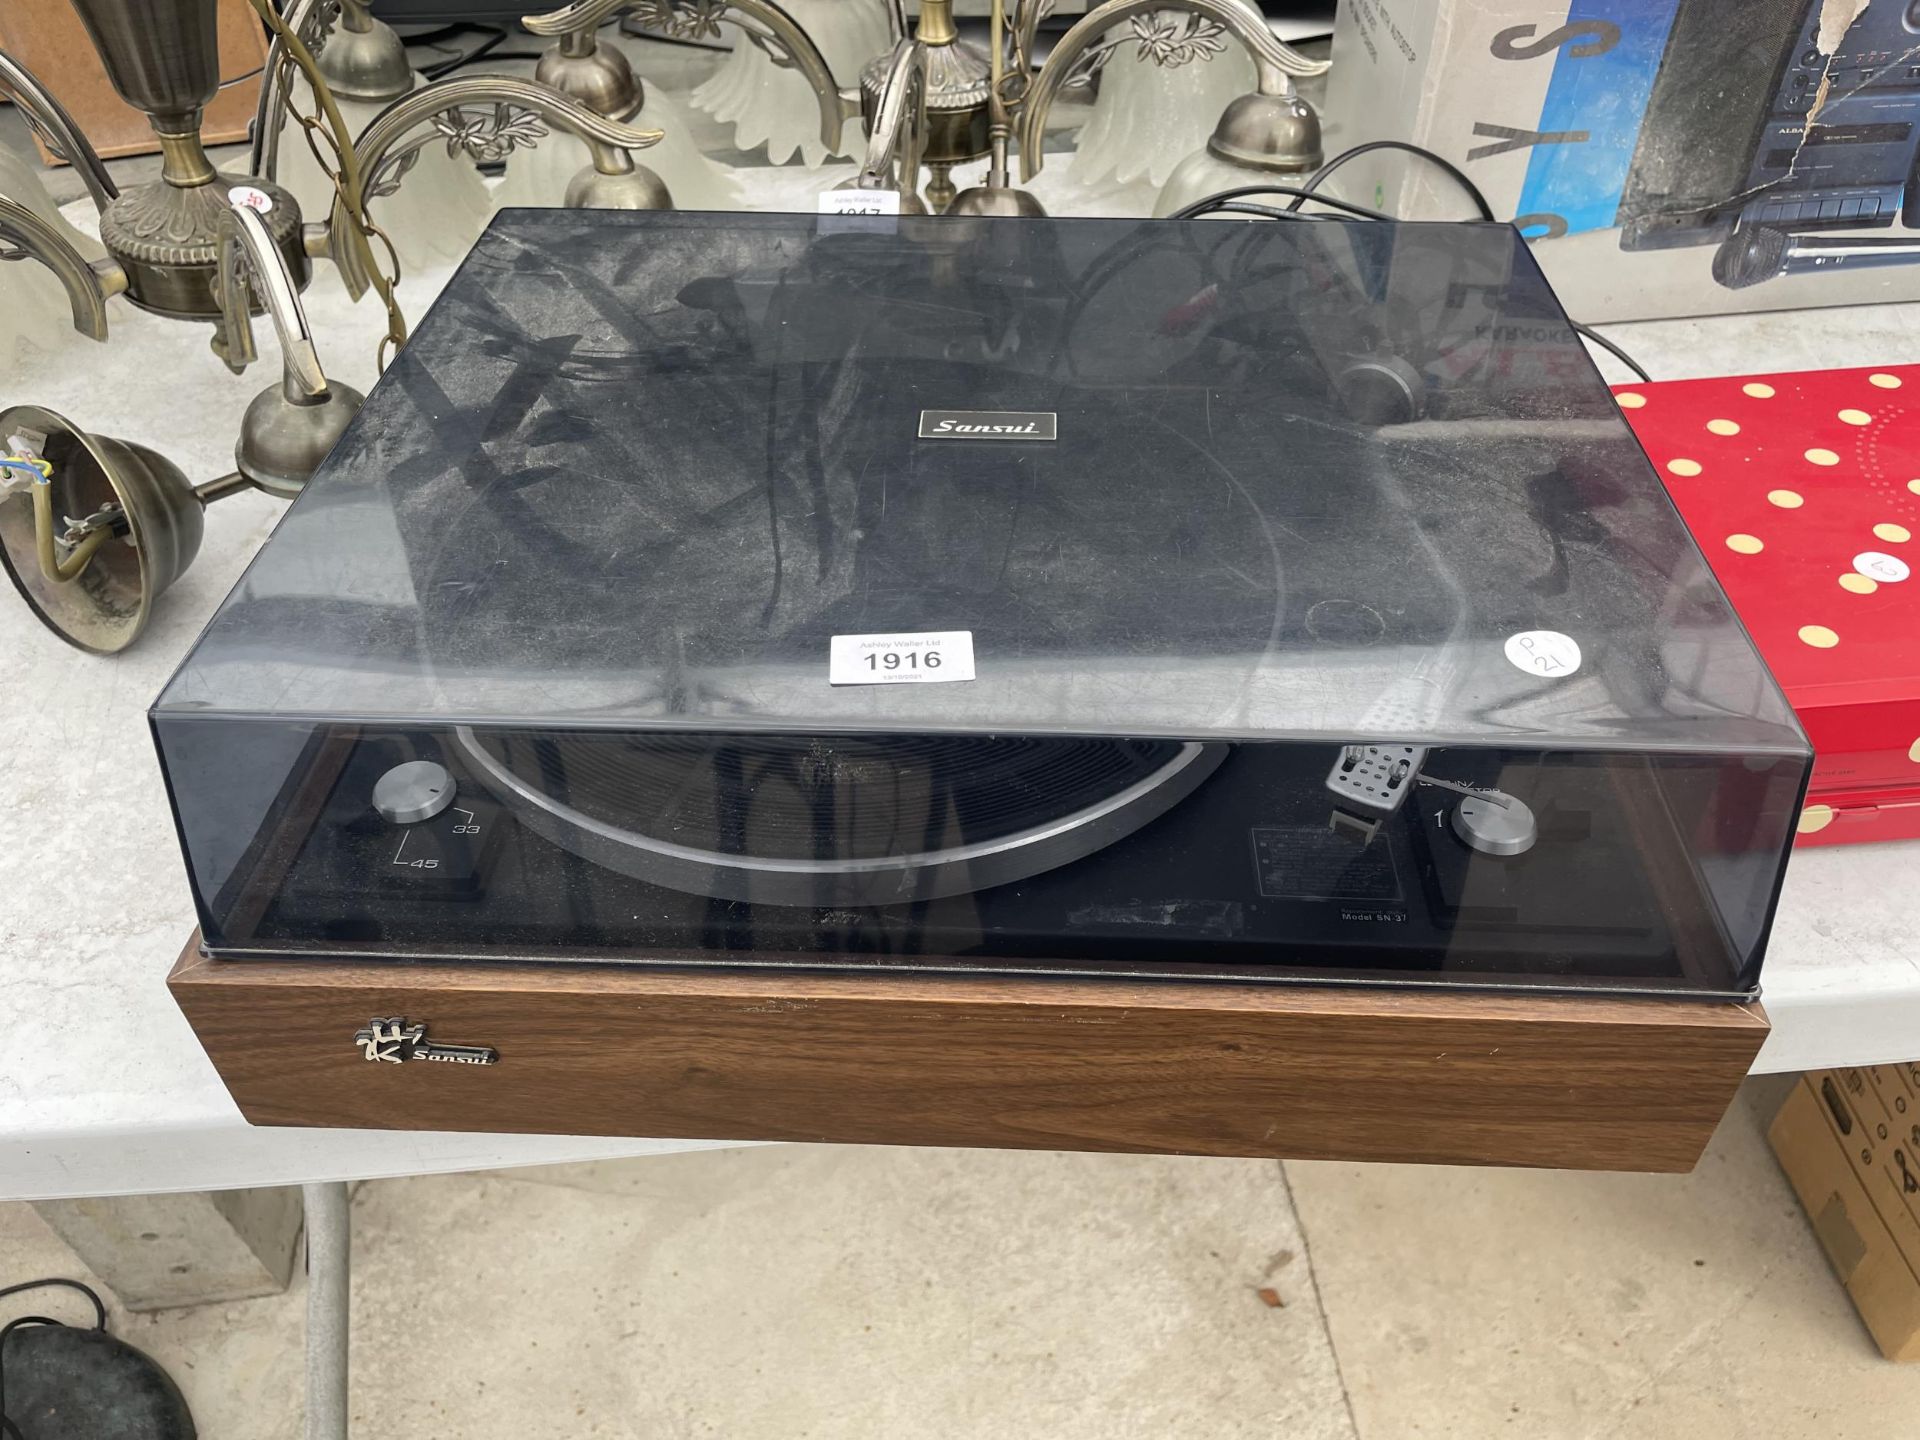 A SANSUI RECORD PLAYER WITH STYLUS